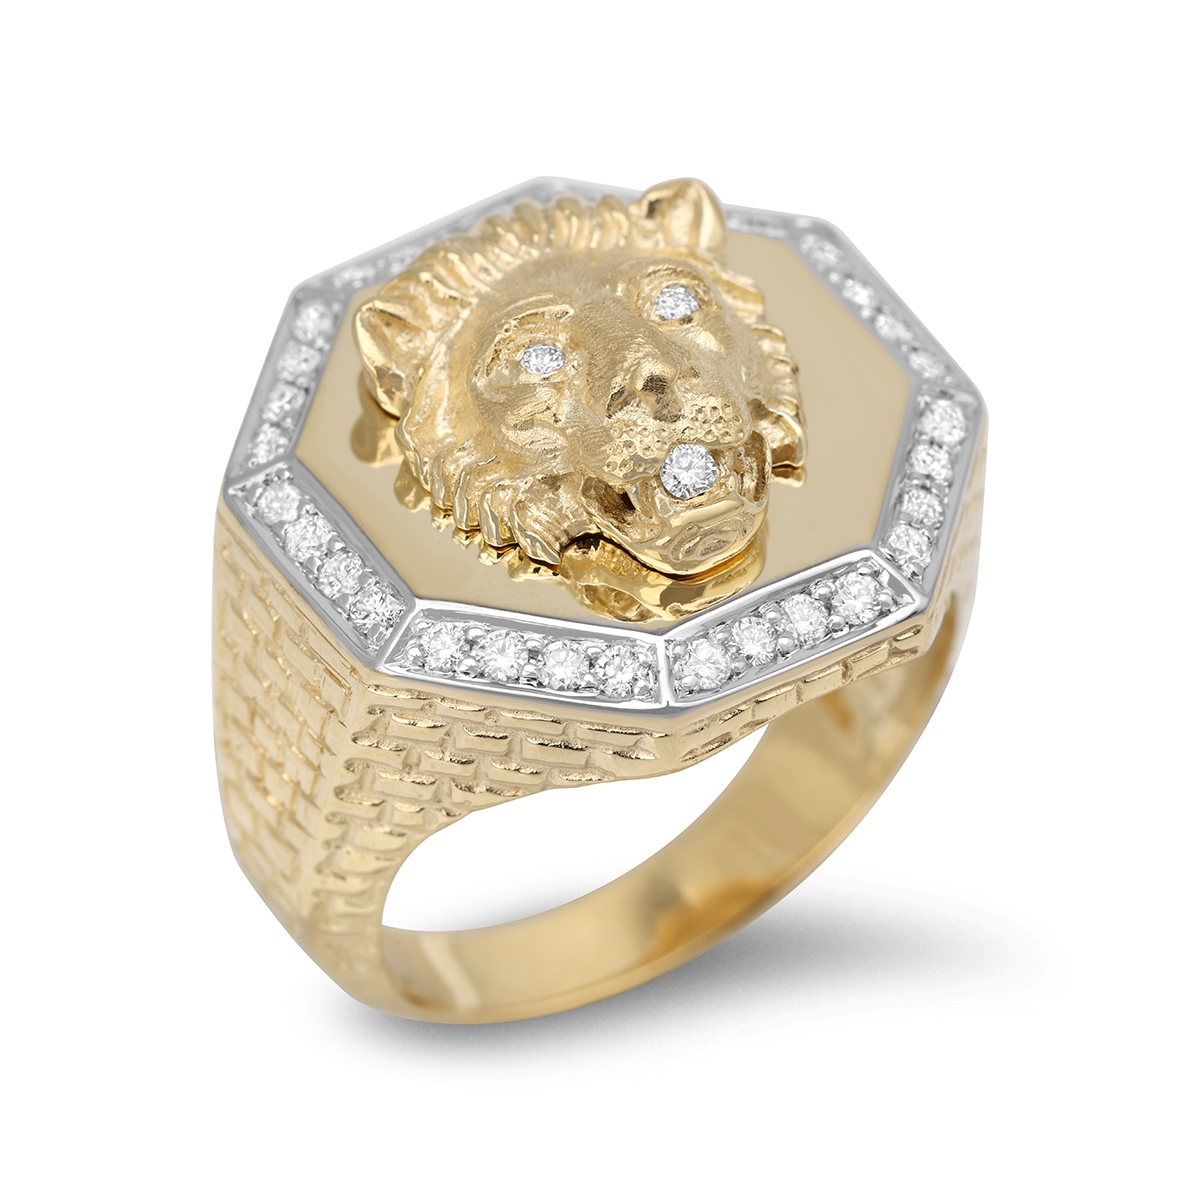 Lion of Judah 14K Gold Men's Ring With White Diamond Halo (Choice of Colors) - 1